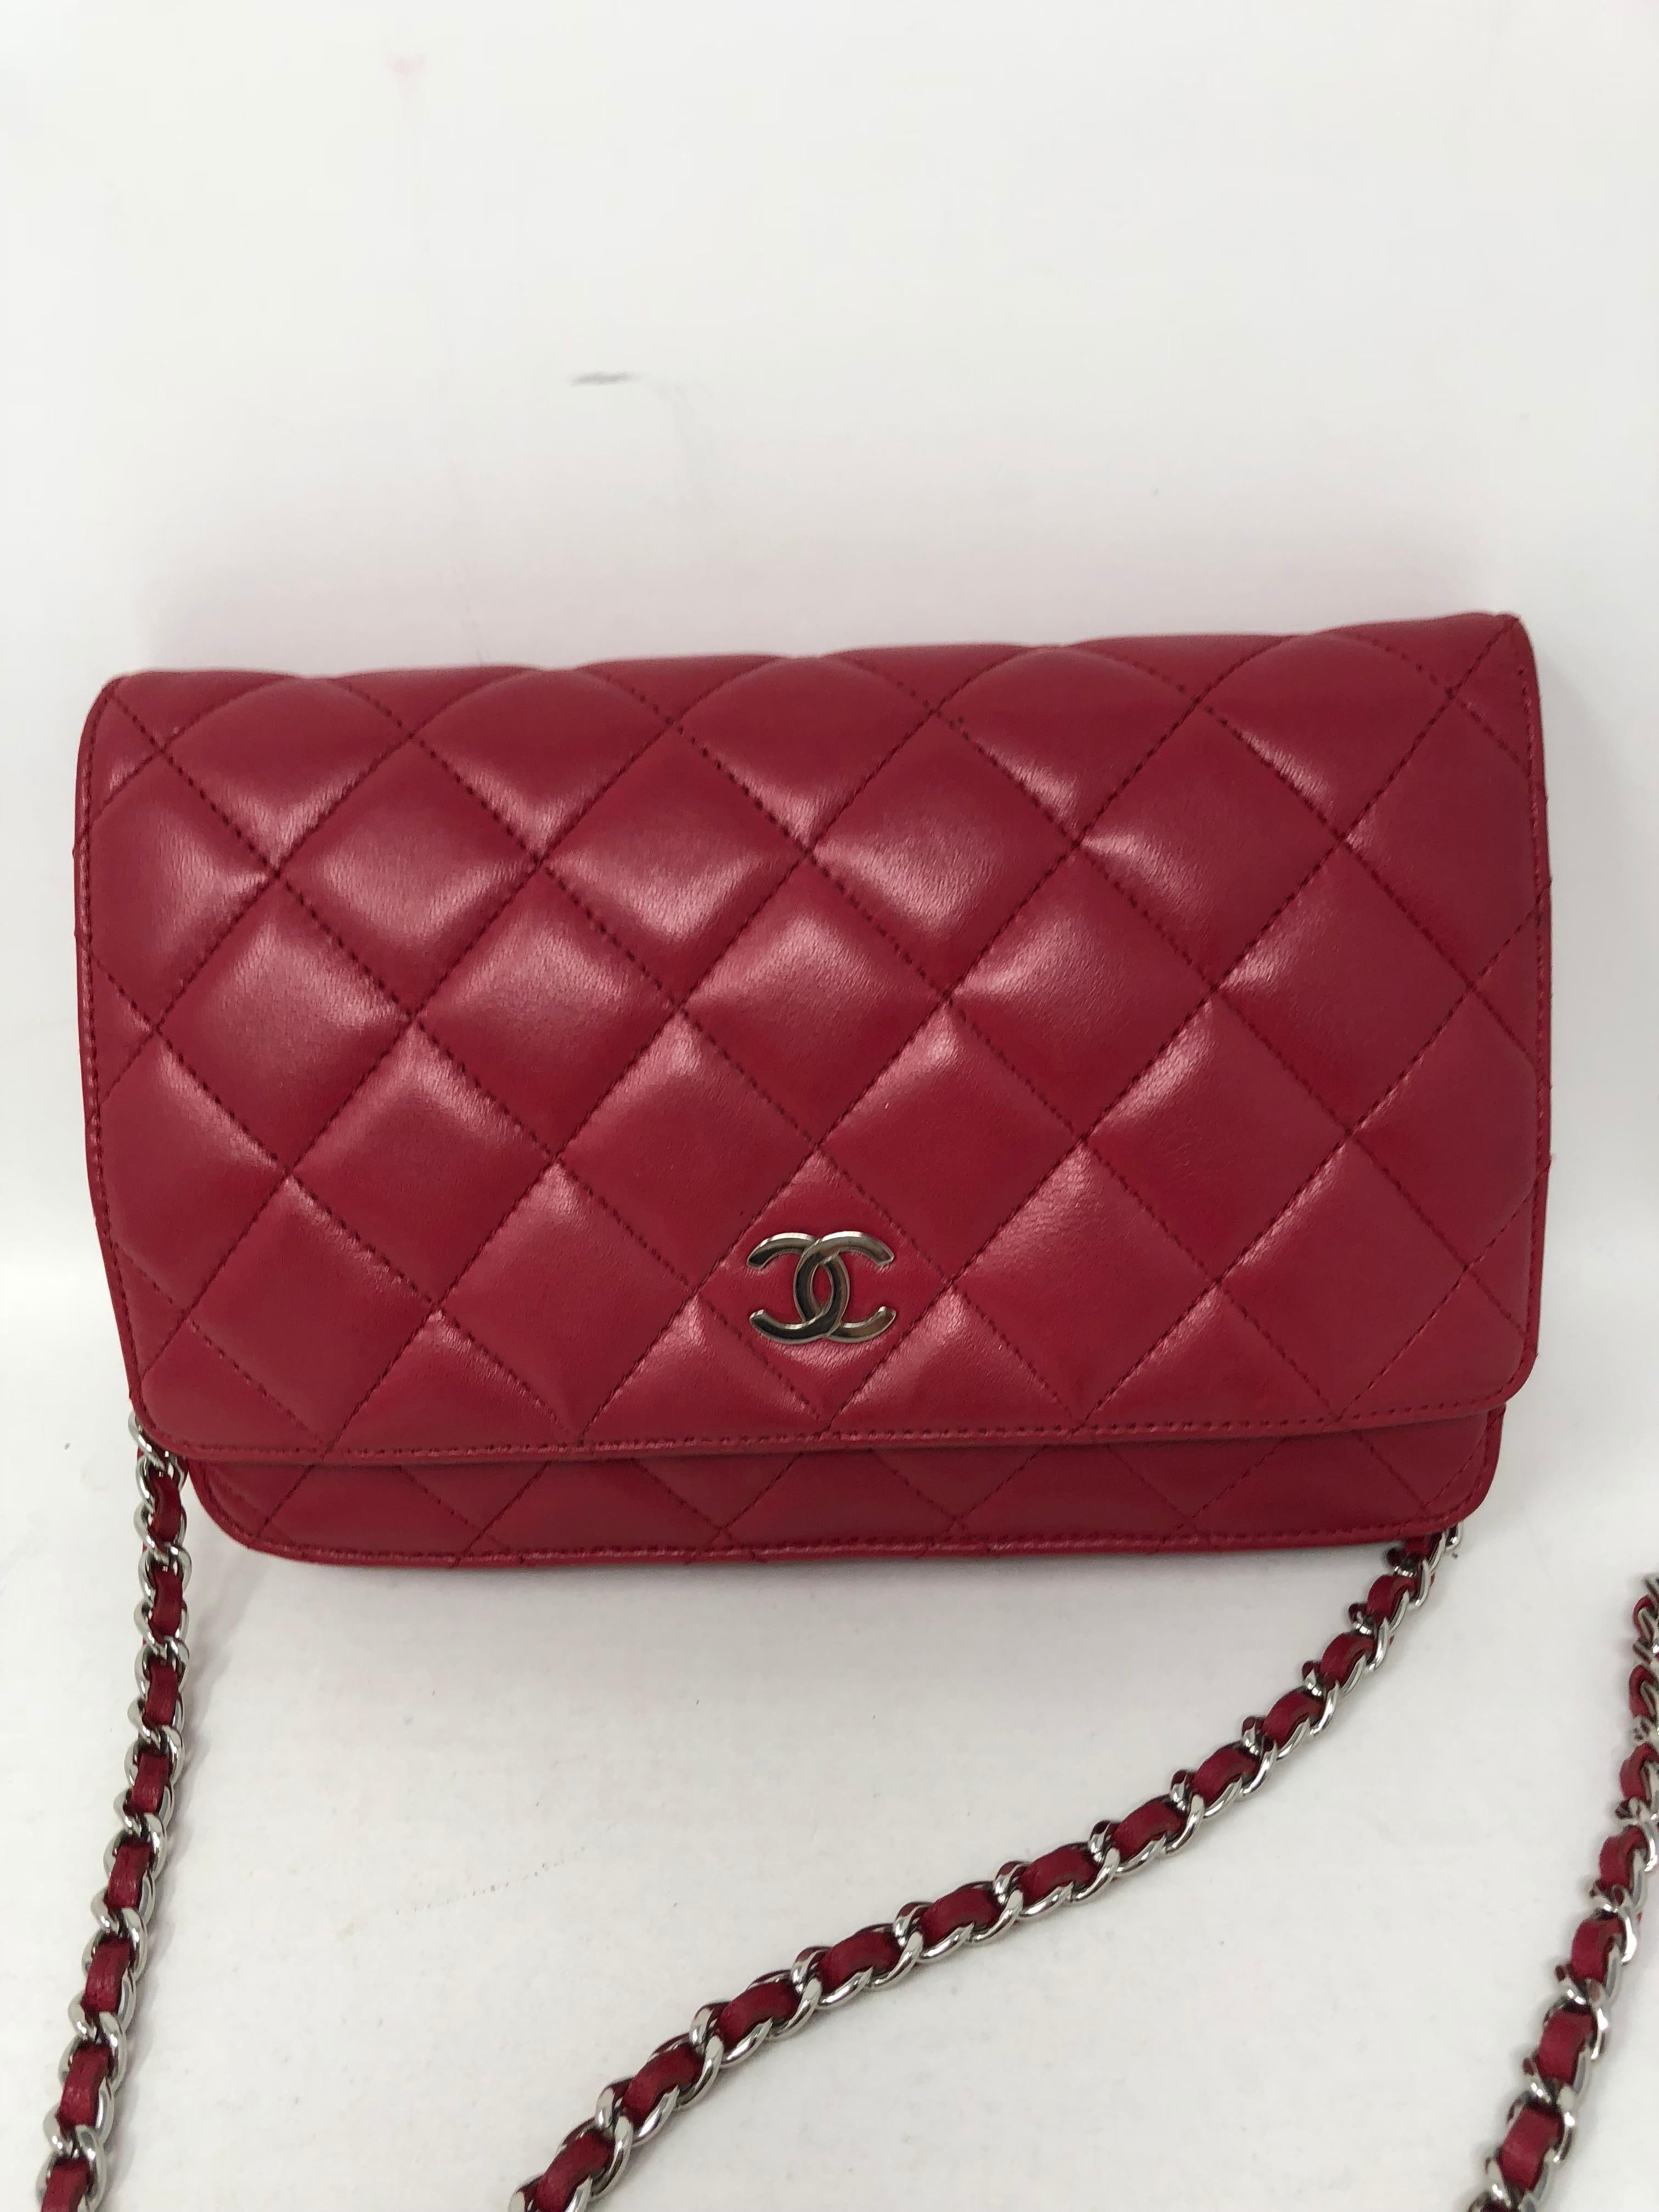 Chanel Raspberry hot pink Wallet on Chain Crossbody Bag. Bright hot pink leather with silver hardware. Mint condition. Hard to find color. Guaranteed authentic. 